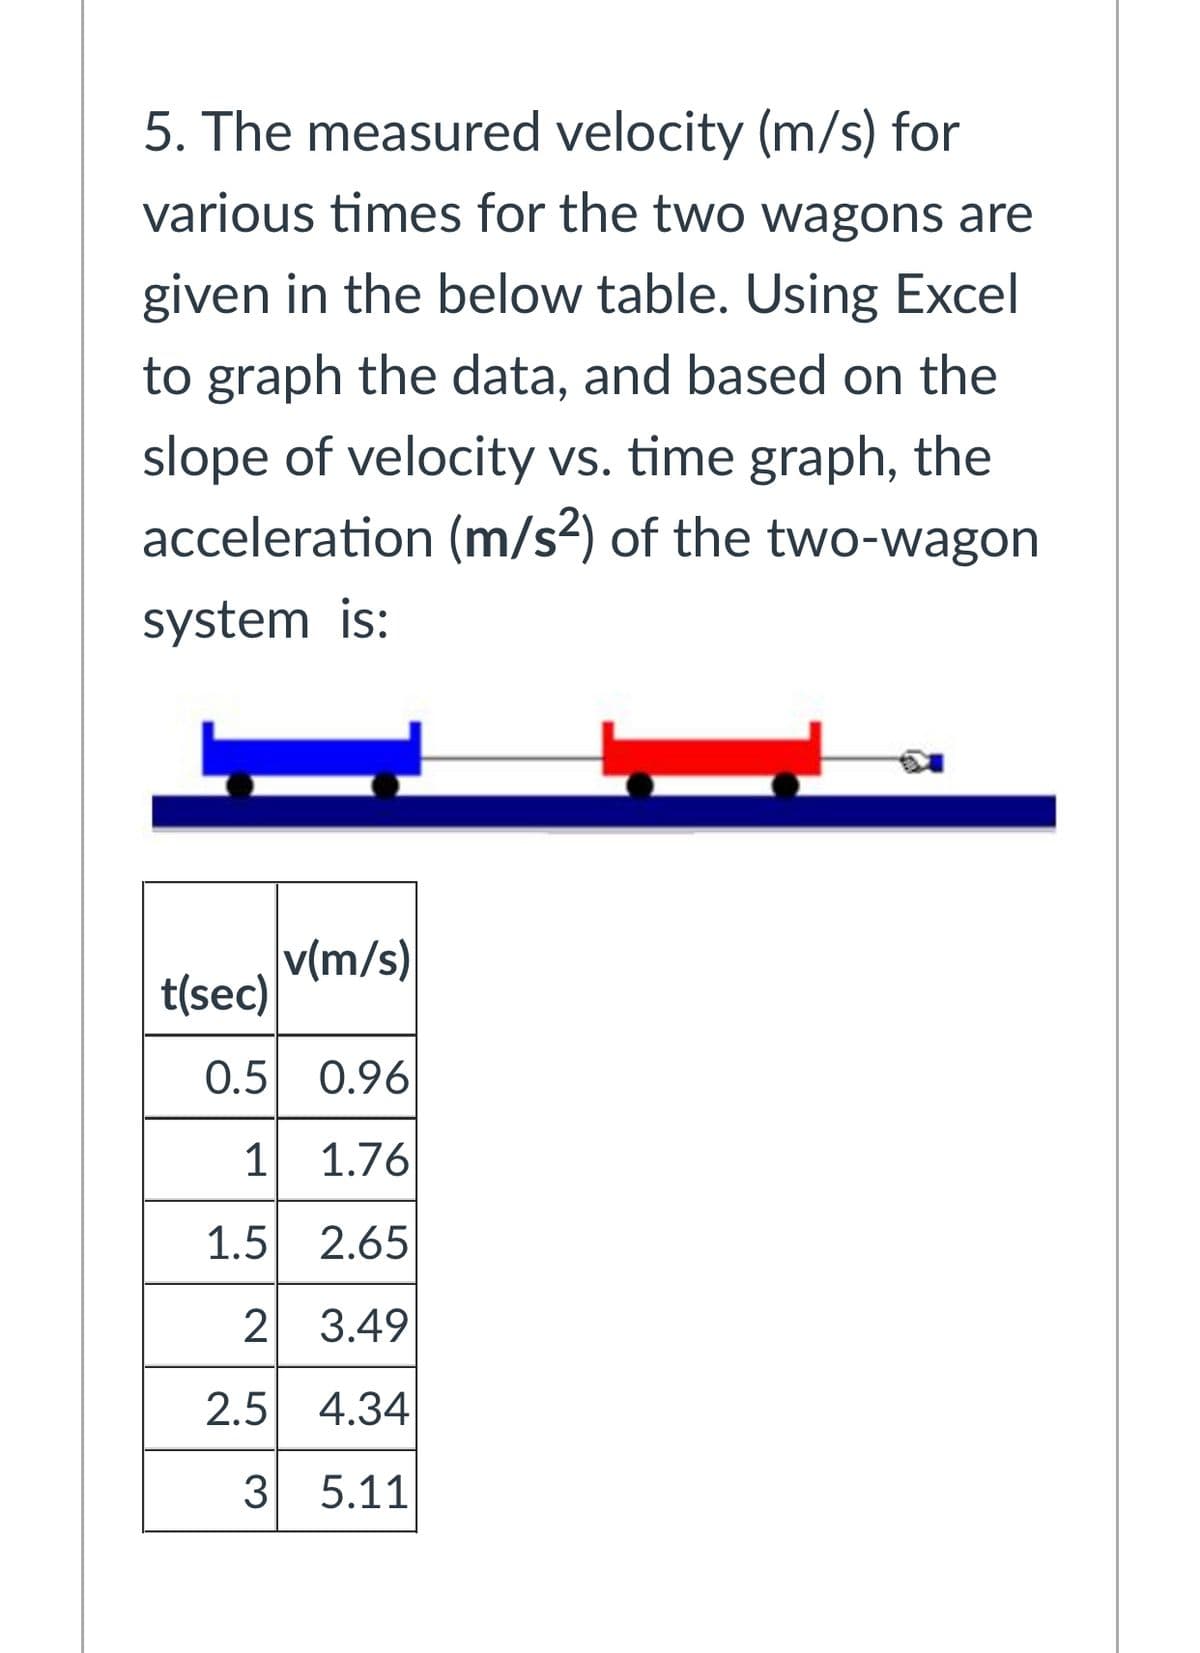 5. The measured velocity (m/s) for
various times for the two wagons are
given in the below table. Using Excel
to graph the data, and based on the
slope of velocity vs. time graph, the
acceleration (m/s²) of the two-wagon
system is:
v(m/s)
t(sec)
0.5 0.96
1
1.76
1.5 2.65
2 3.49
2.5 4.34
3 5.11
